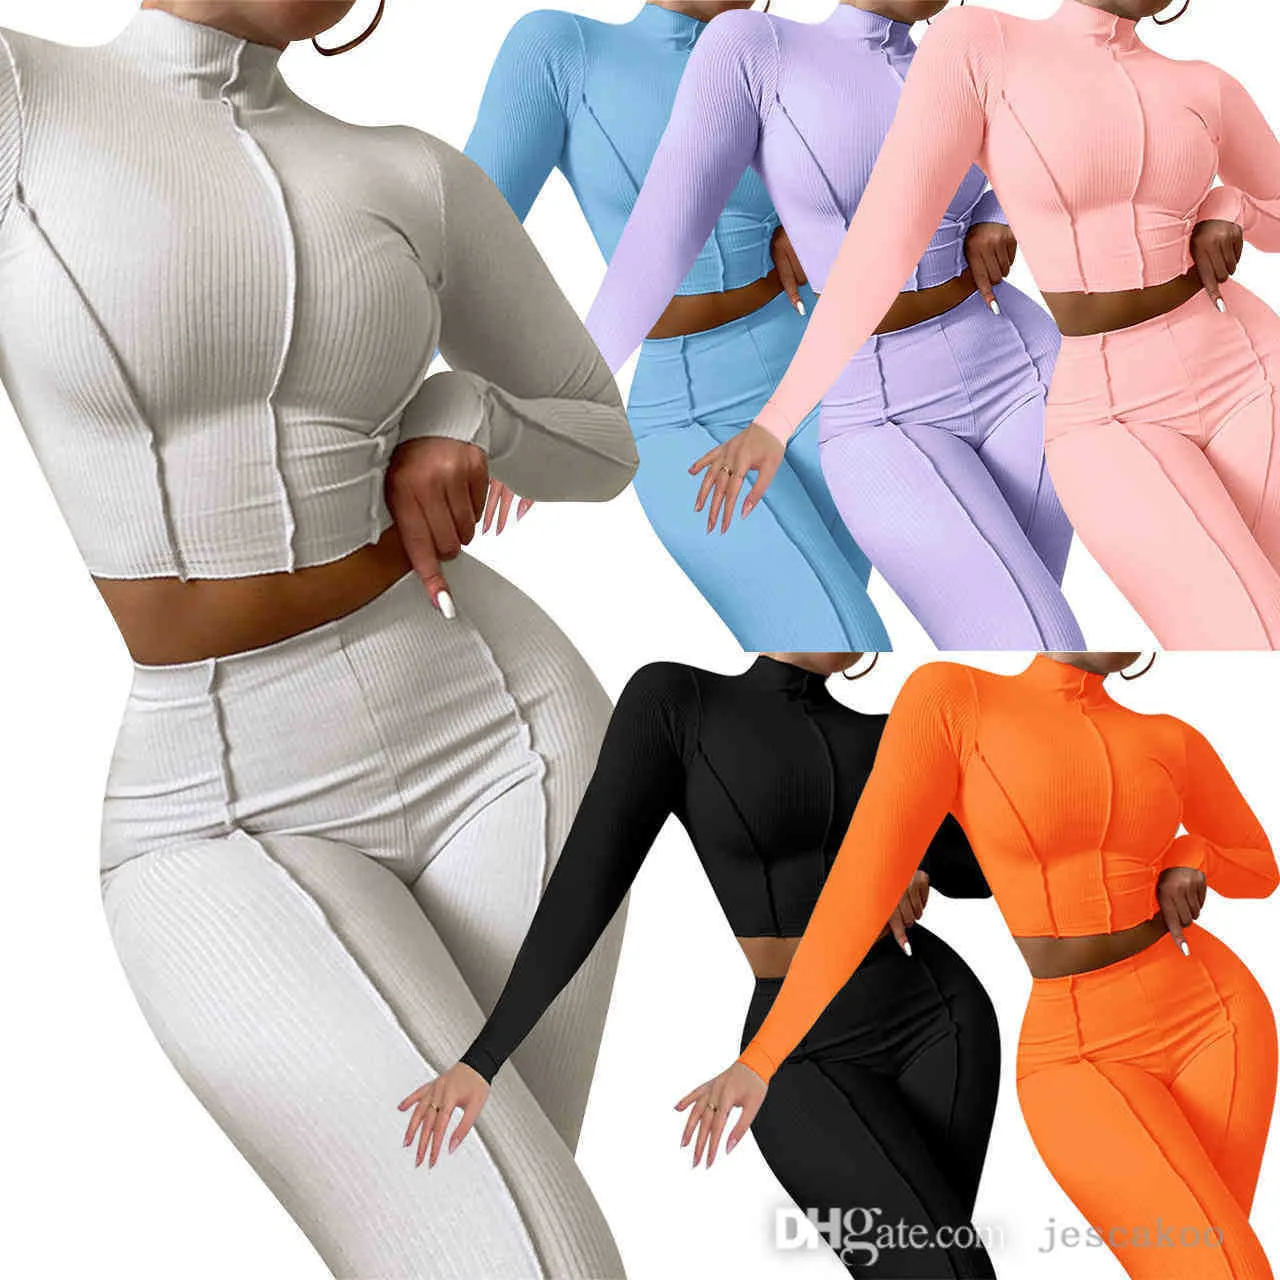 Women Knitted Tracksuits Autumn Turtleneck Stitching Crop Top High Waist Slim Pants Sport 2 Piece Yoga Outfits Jogging Suit S-XXL